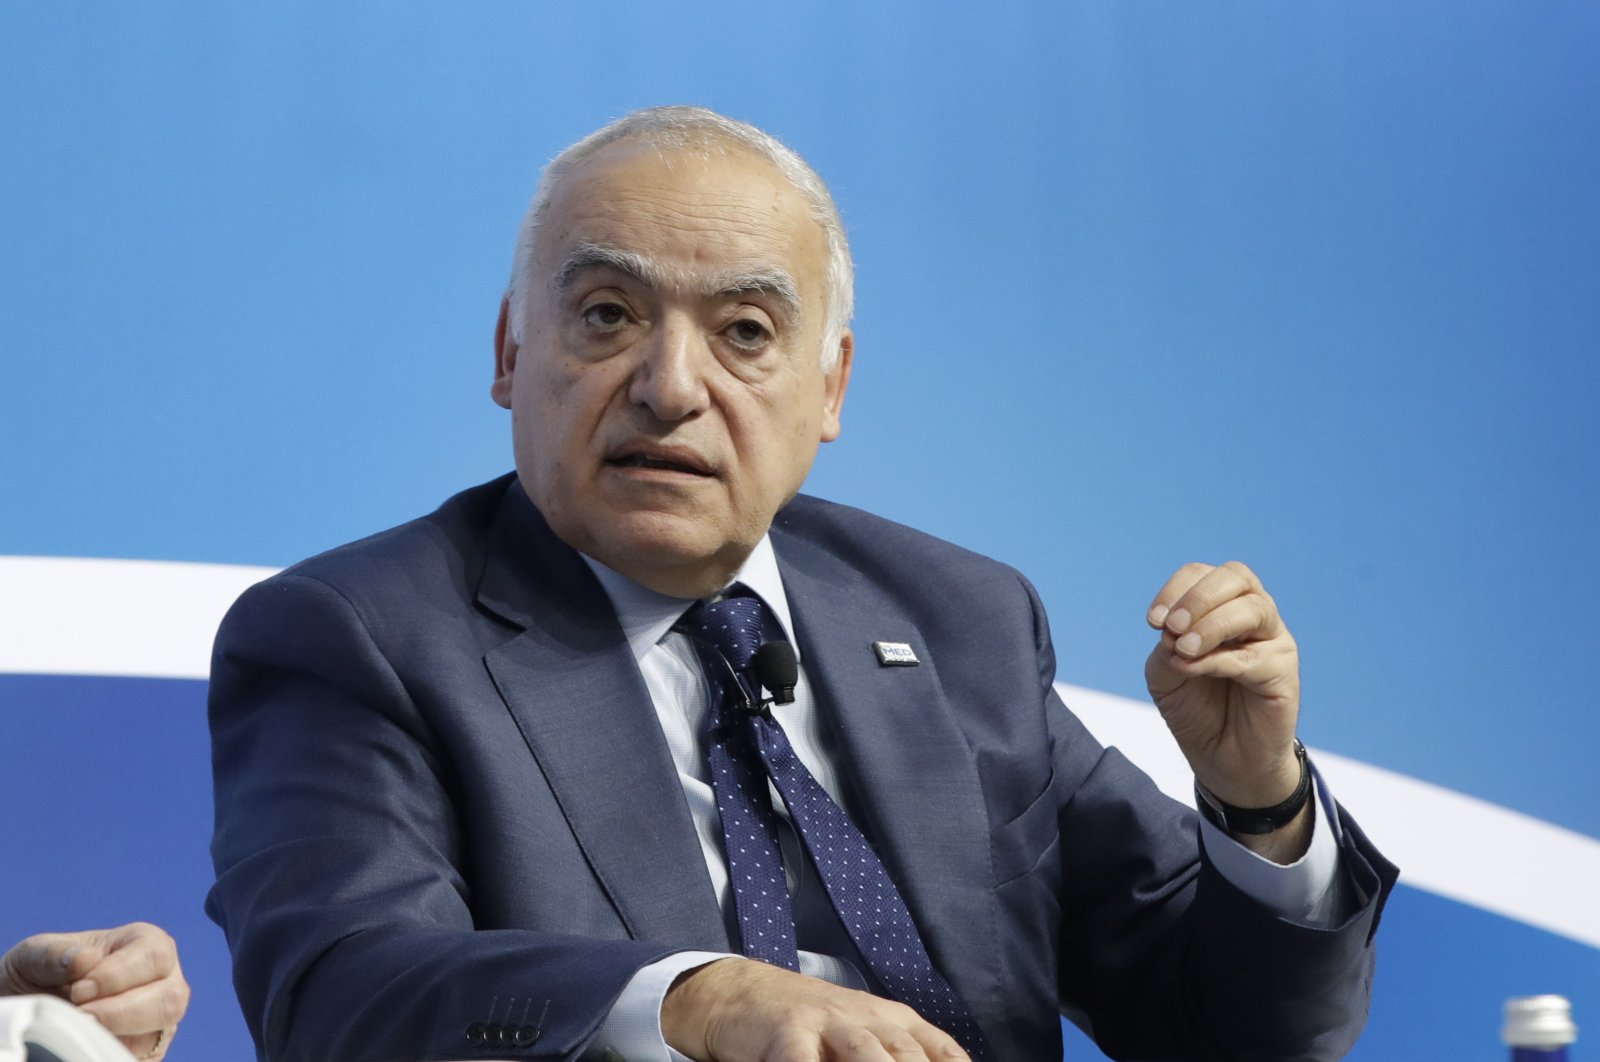 Then-U.N. special envoy to Libya Ghassan Salame speaks during the Mediterranean Dialogues conference in Rome, Italy, Dec. 7, 2019. (AP Photo)